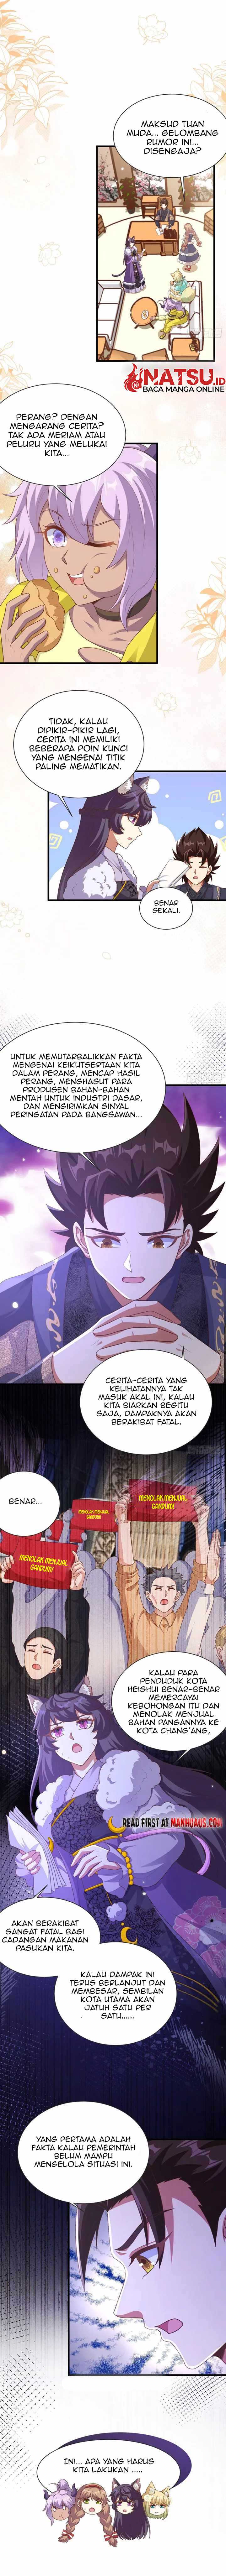 To Be The Castellan King Chapter 476